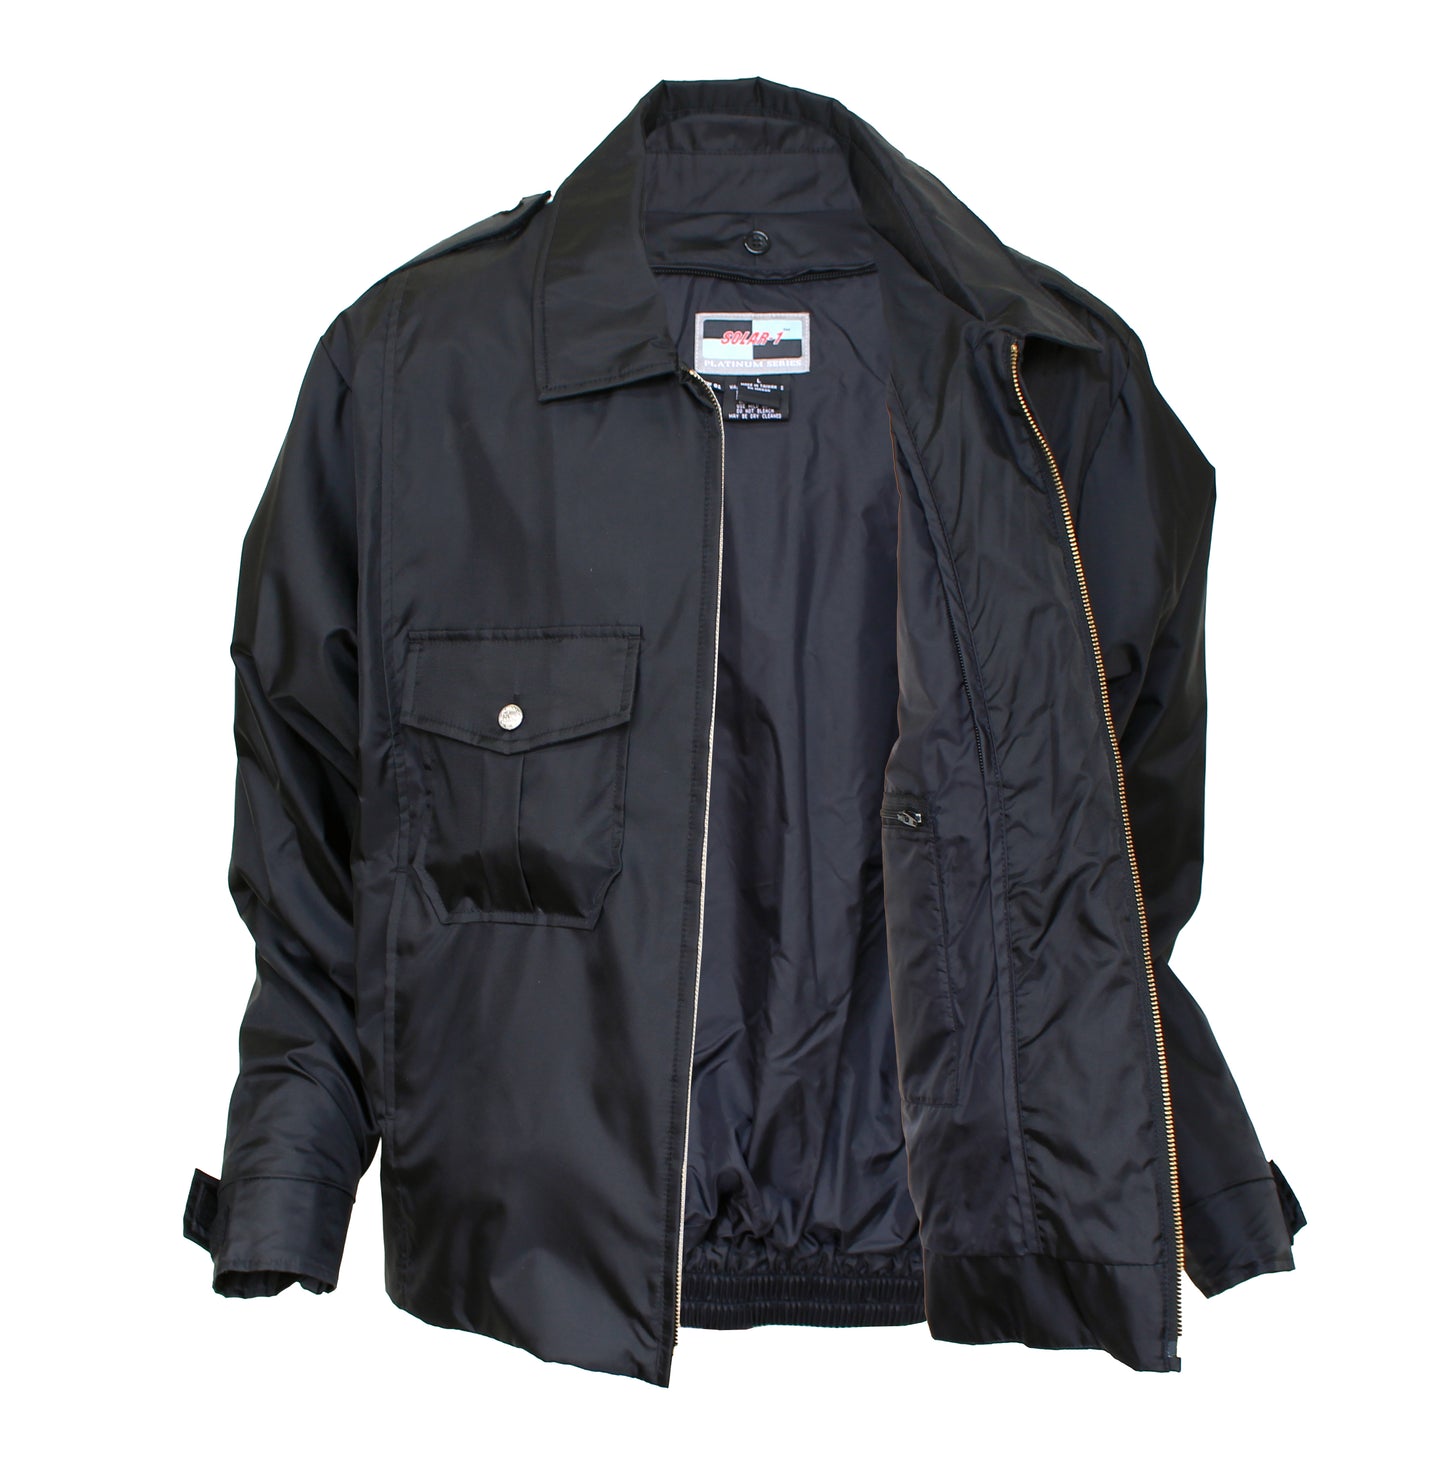 Solar 1 Clothing Police Nylon Windbreaker Duty Jacket with Removable Liner PW01